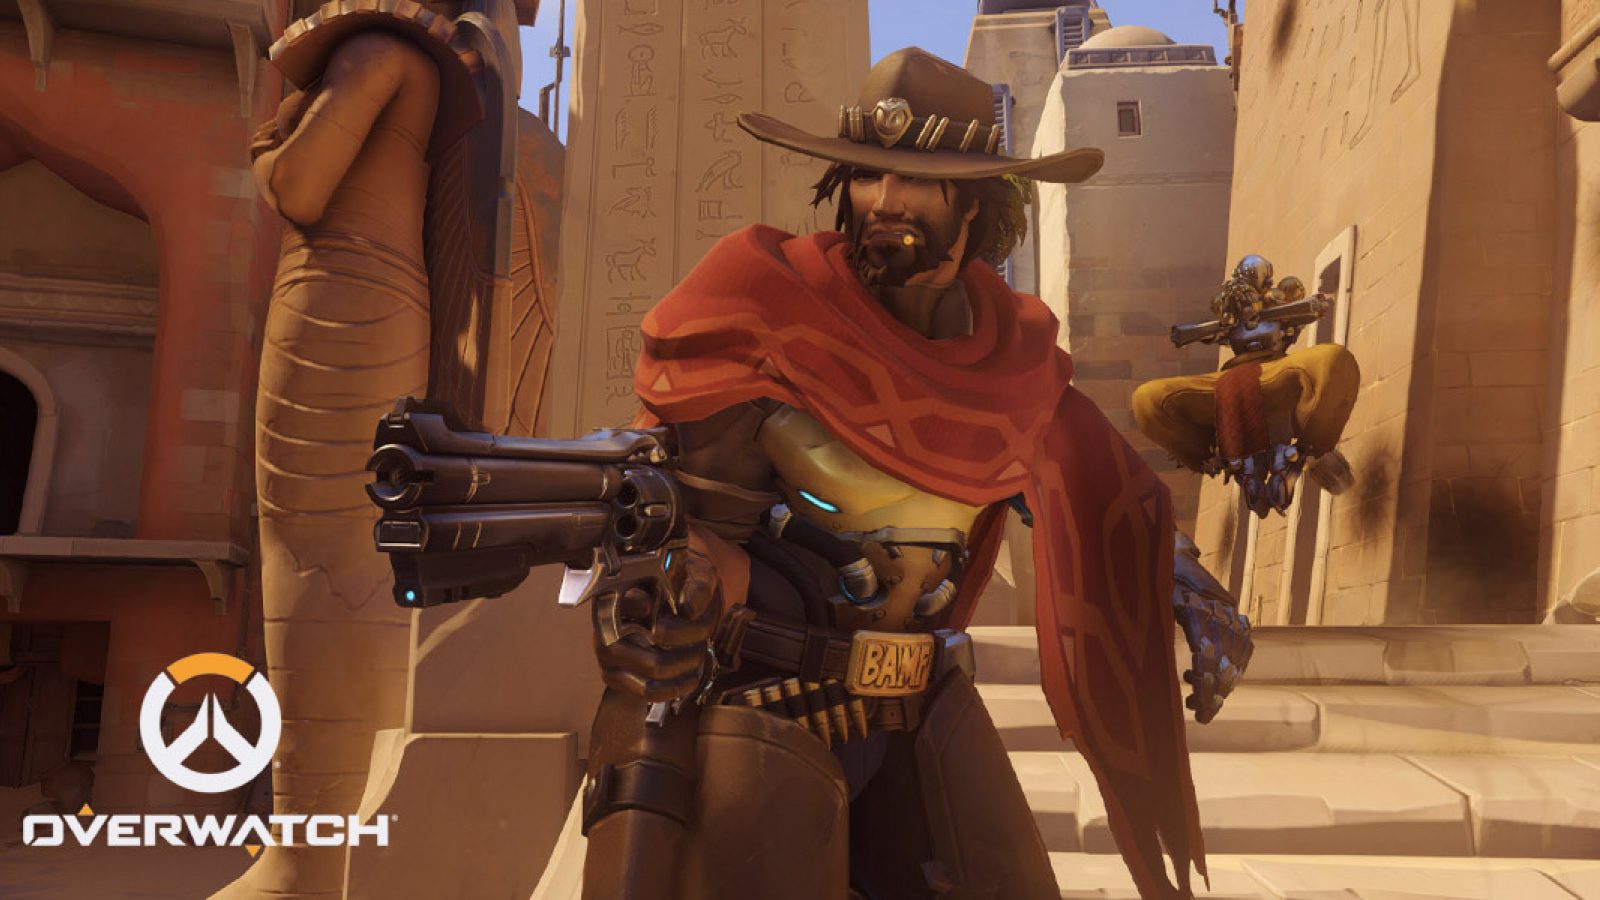 Overwatch fans are loving new McCree Hot Potato mode in the workshop